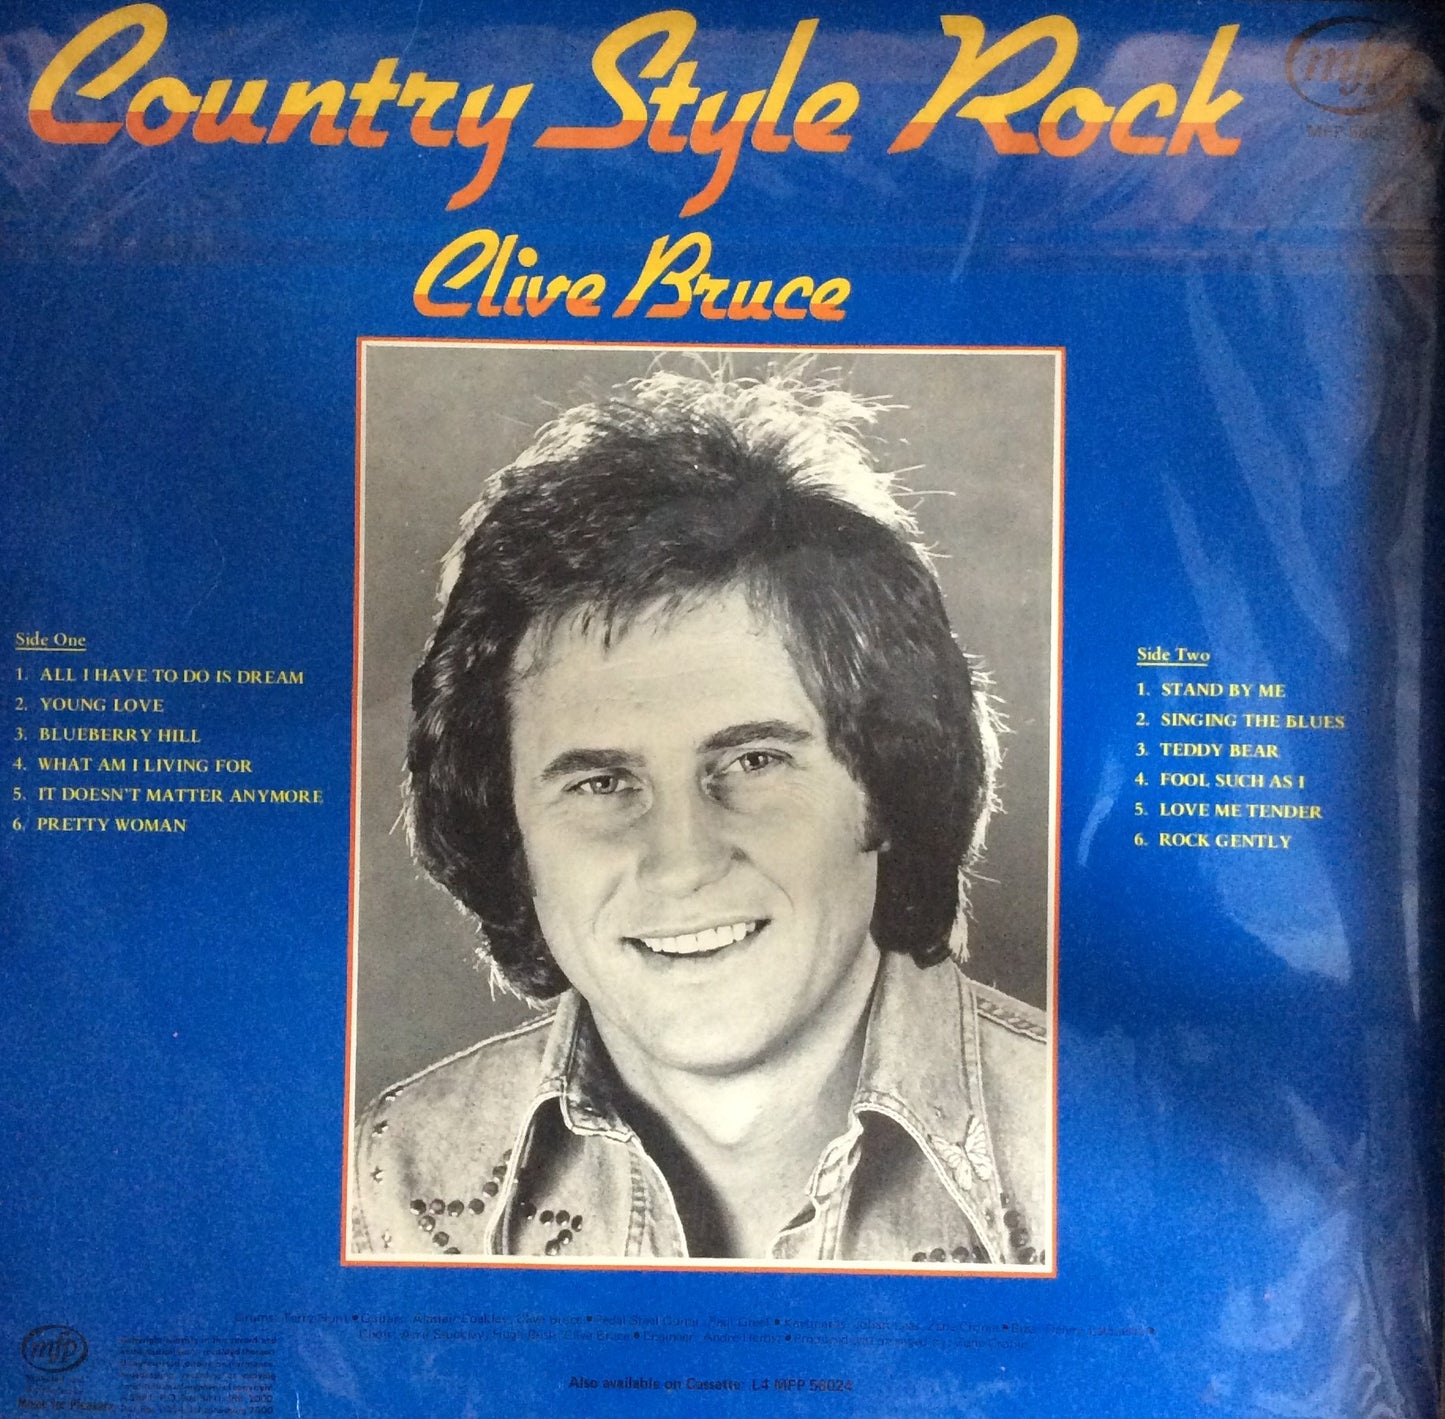 Clive Bruce - Country Style Rock